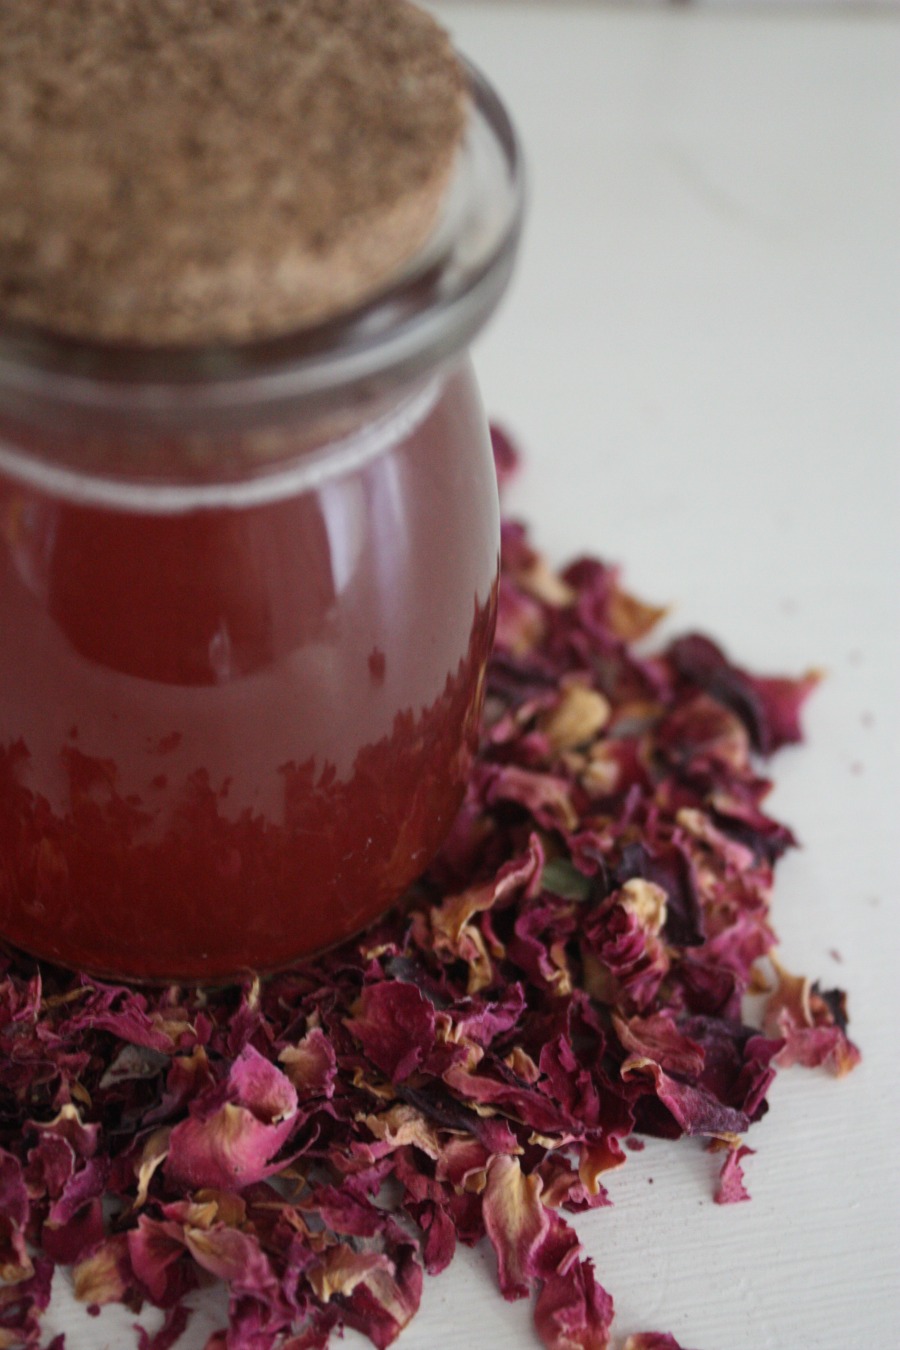 34 Ways To Use Roses | Herbal Academy | If you're planning to harvest rose this season, you may be wondering how to put your bounty to good use. If so, we've gathered 34 DIY rose recipes to help you make the most of your rose harvest!